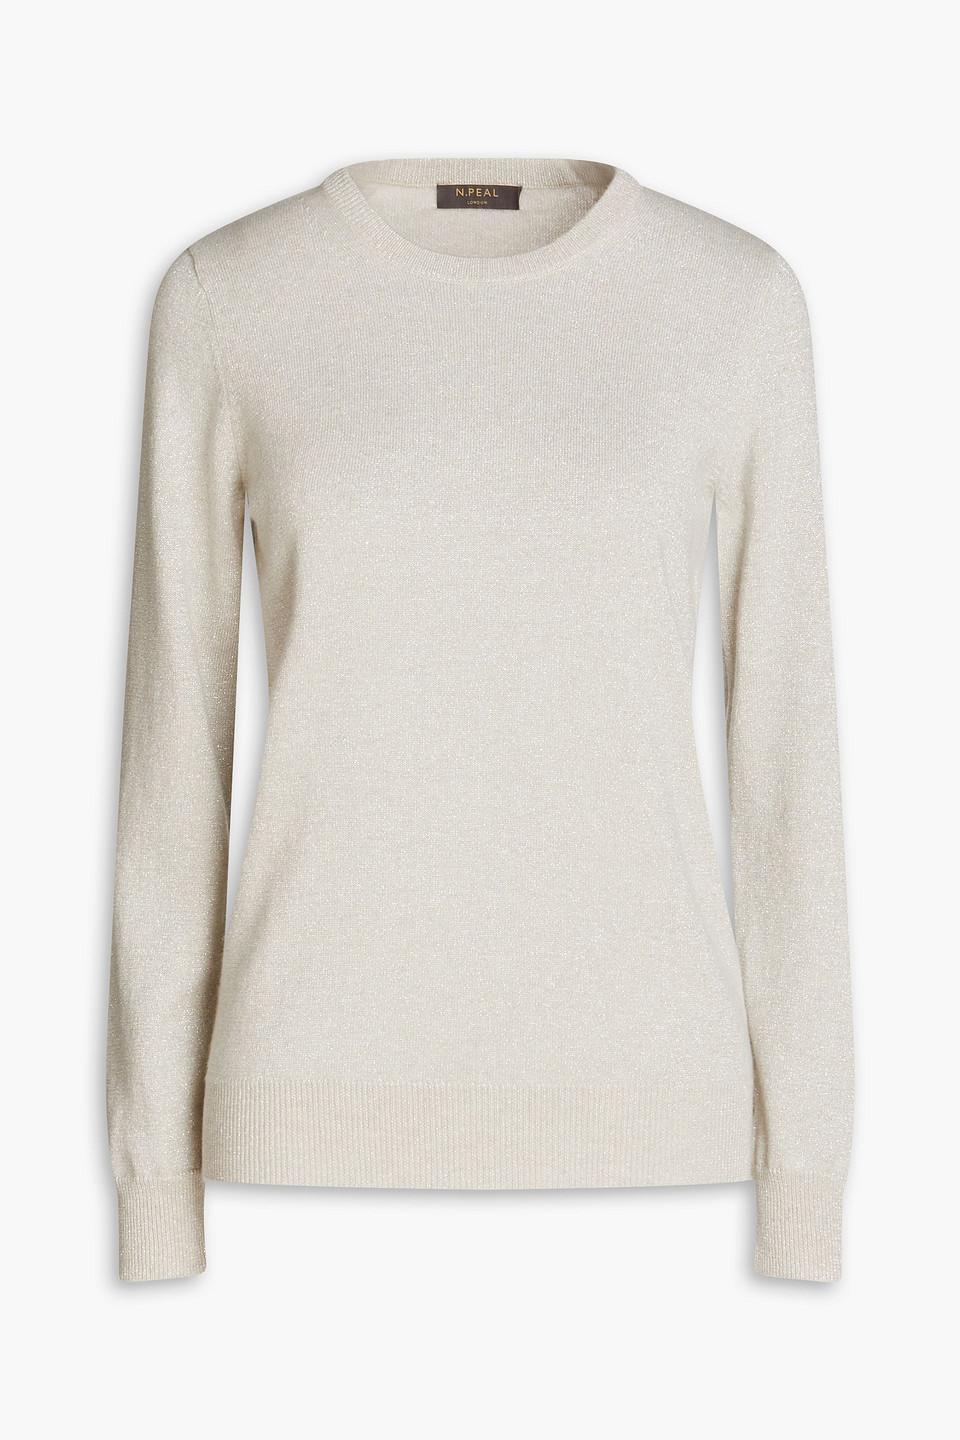 N.Peal Cashmere Metallic Cashmere Sweater in White | Lyst